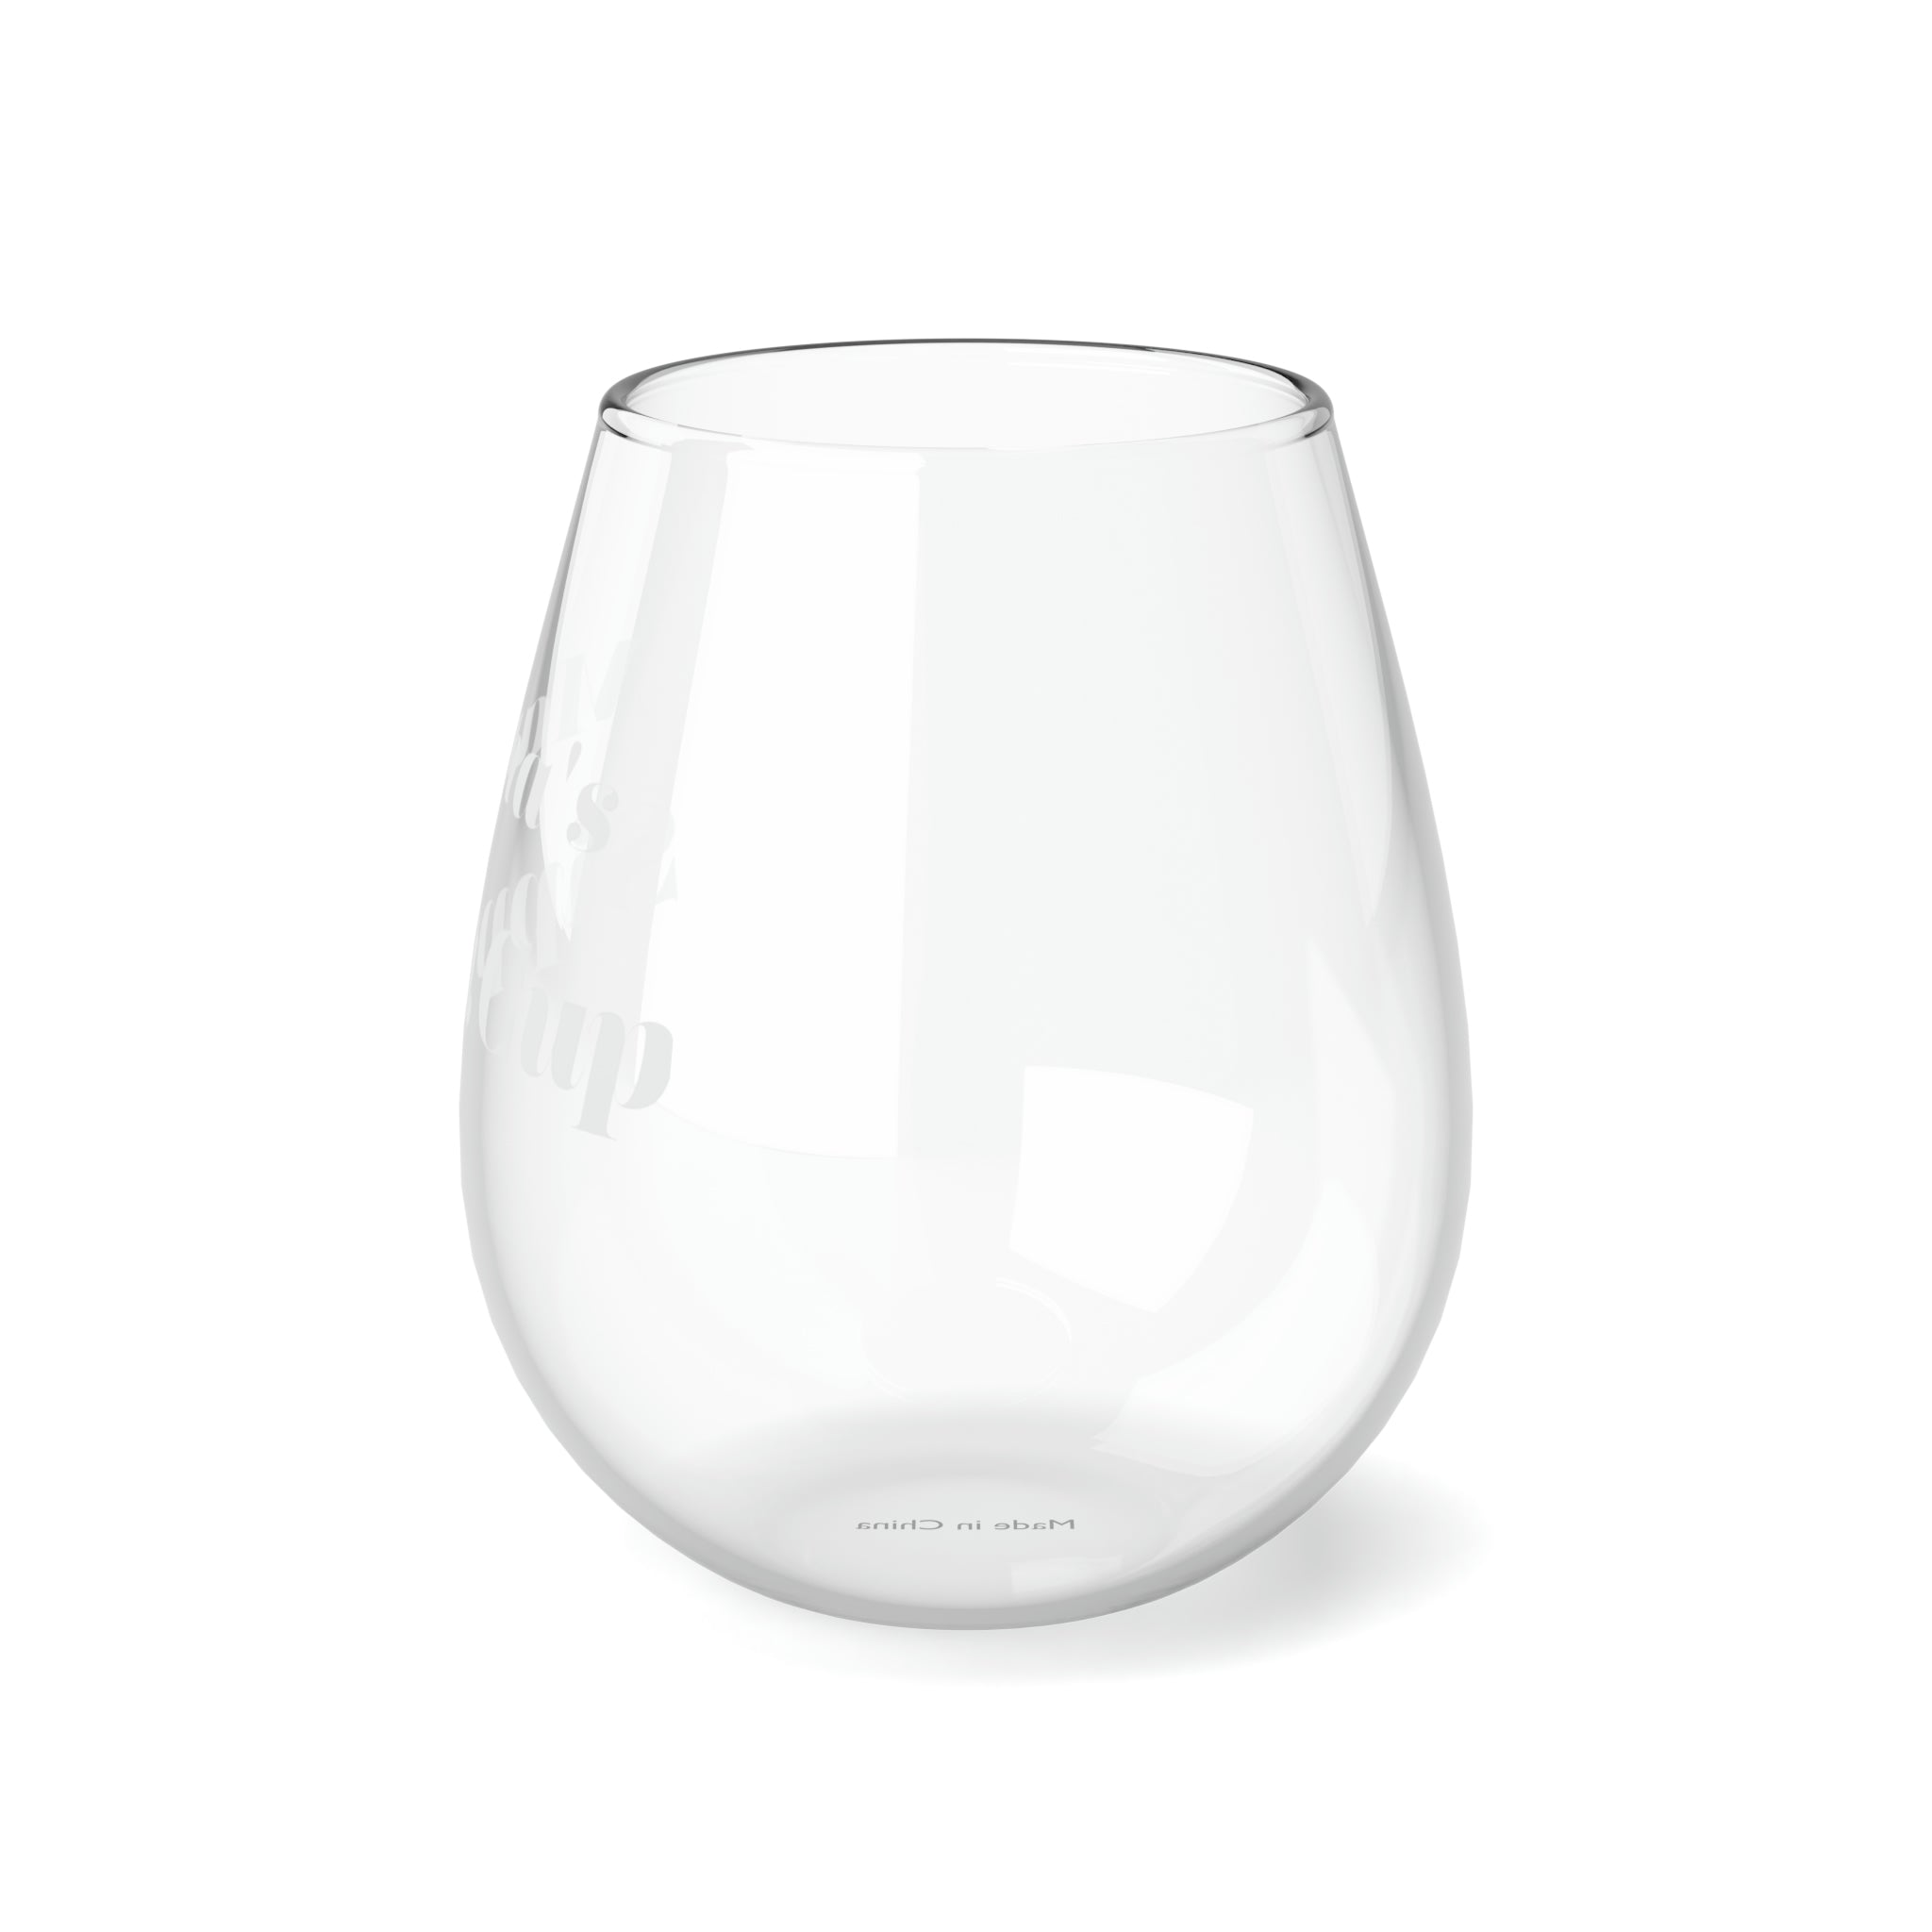 Stemless Wine Glass, 11.75oz - Mama's Sippy Cup